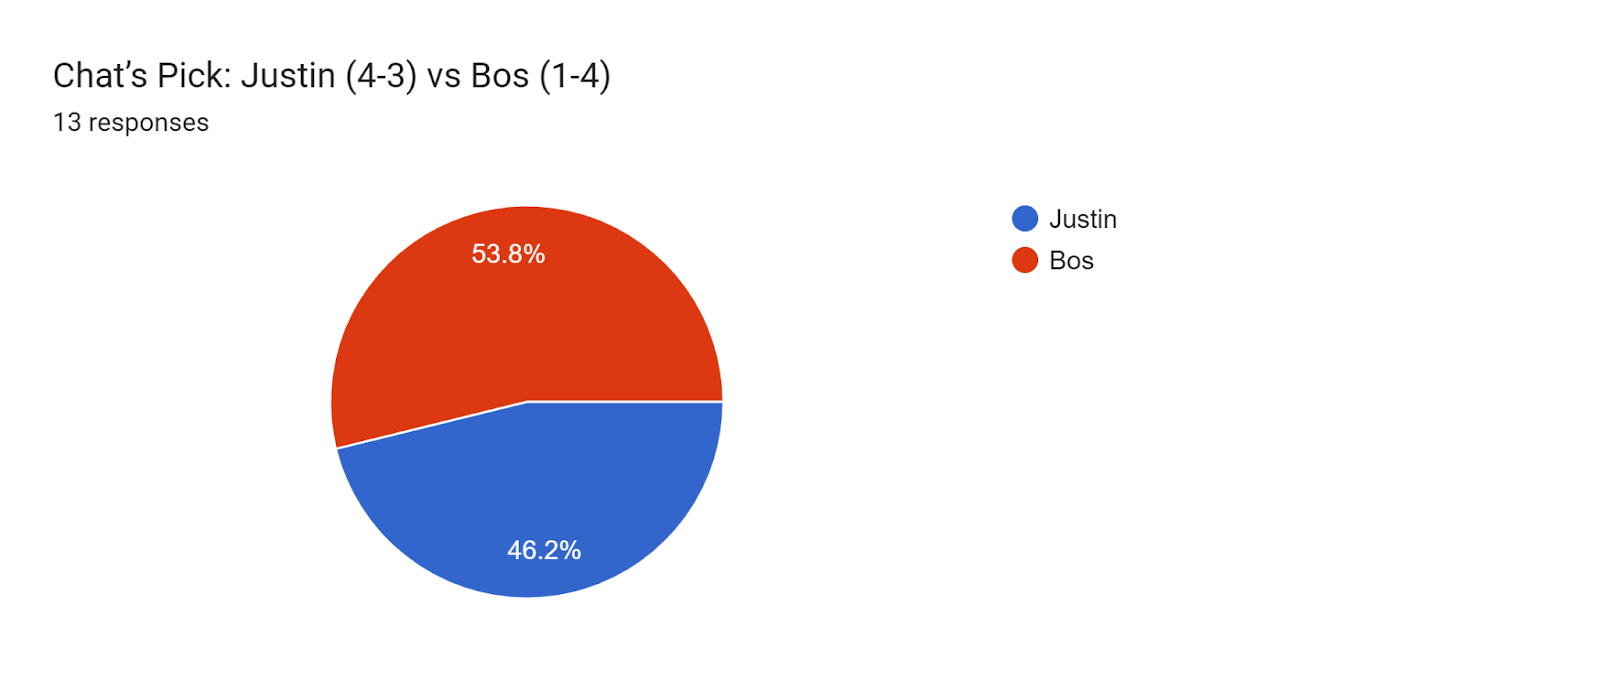 Forms response chart. Question title: Chat’s Pick: Justin (4-3) vs Bos (1-4). Number of responses: 13 responses.